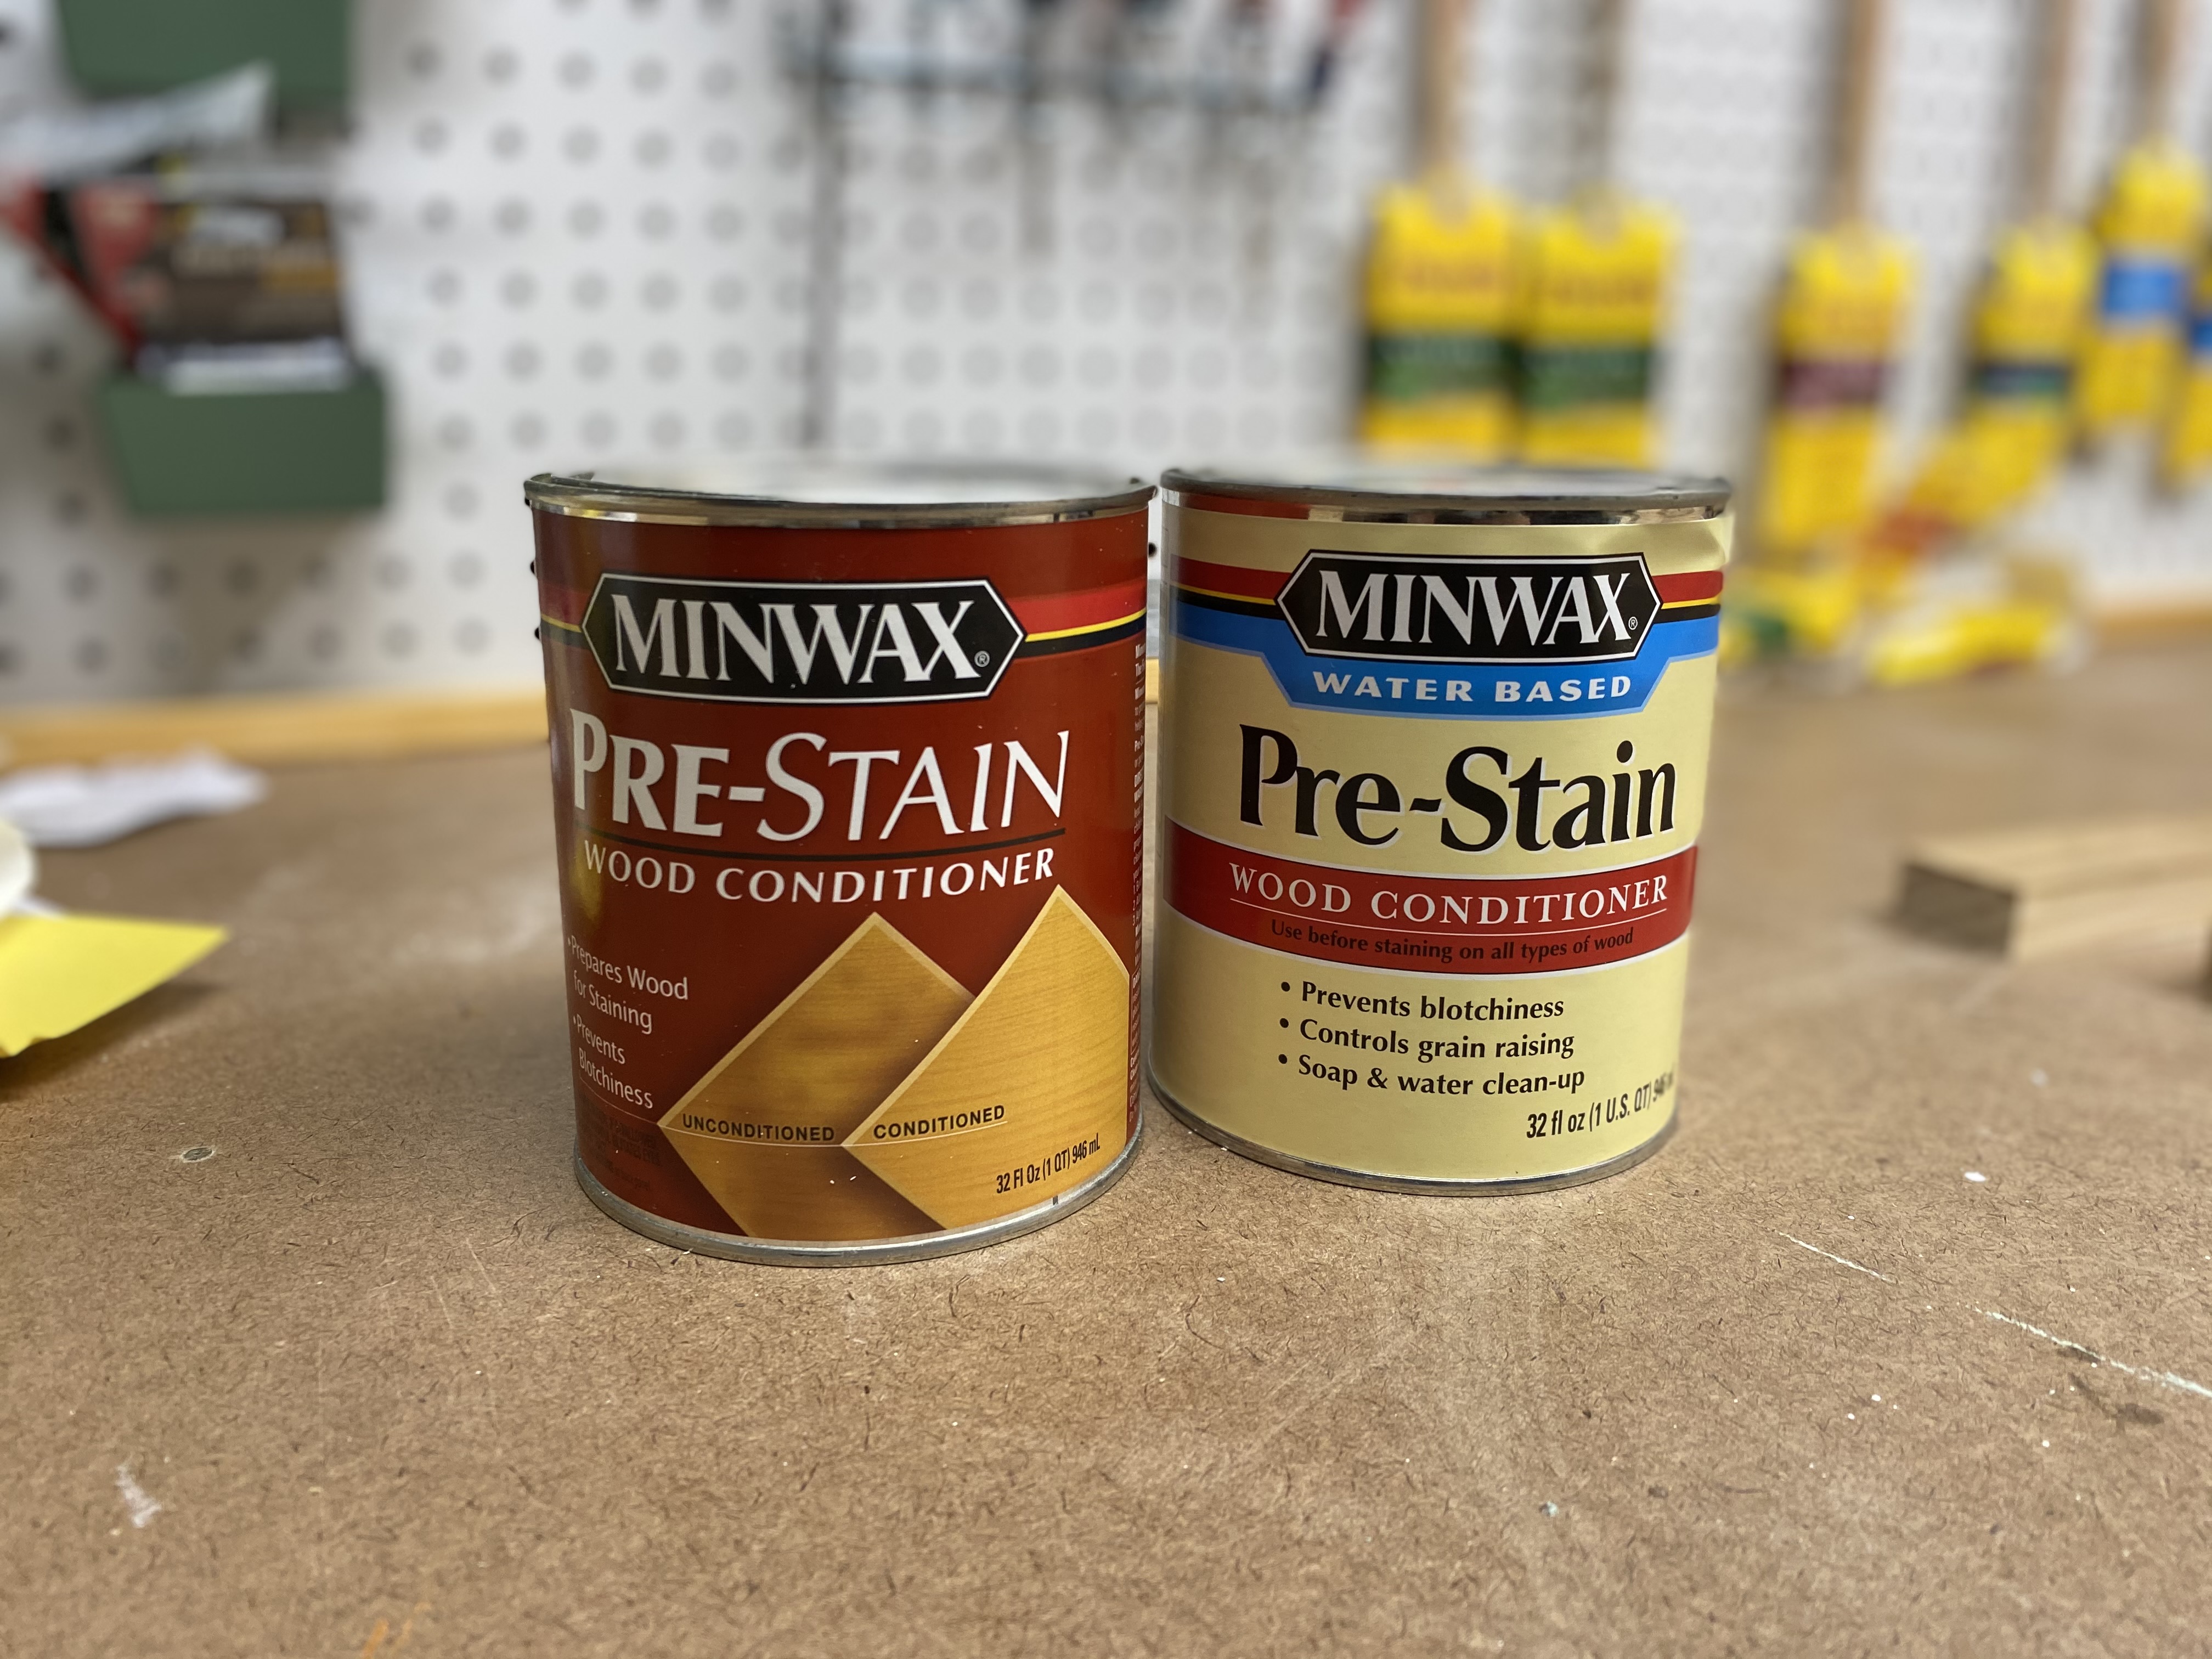 Pre-stain wood conditioner in oil based and water based